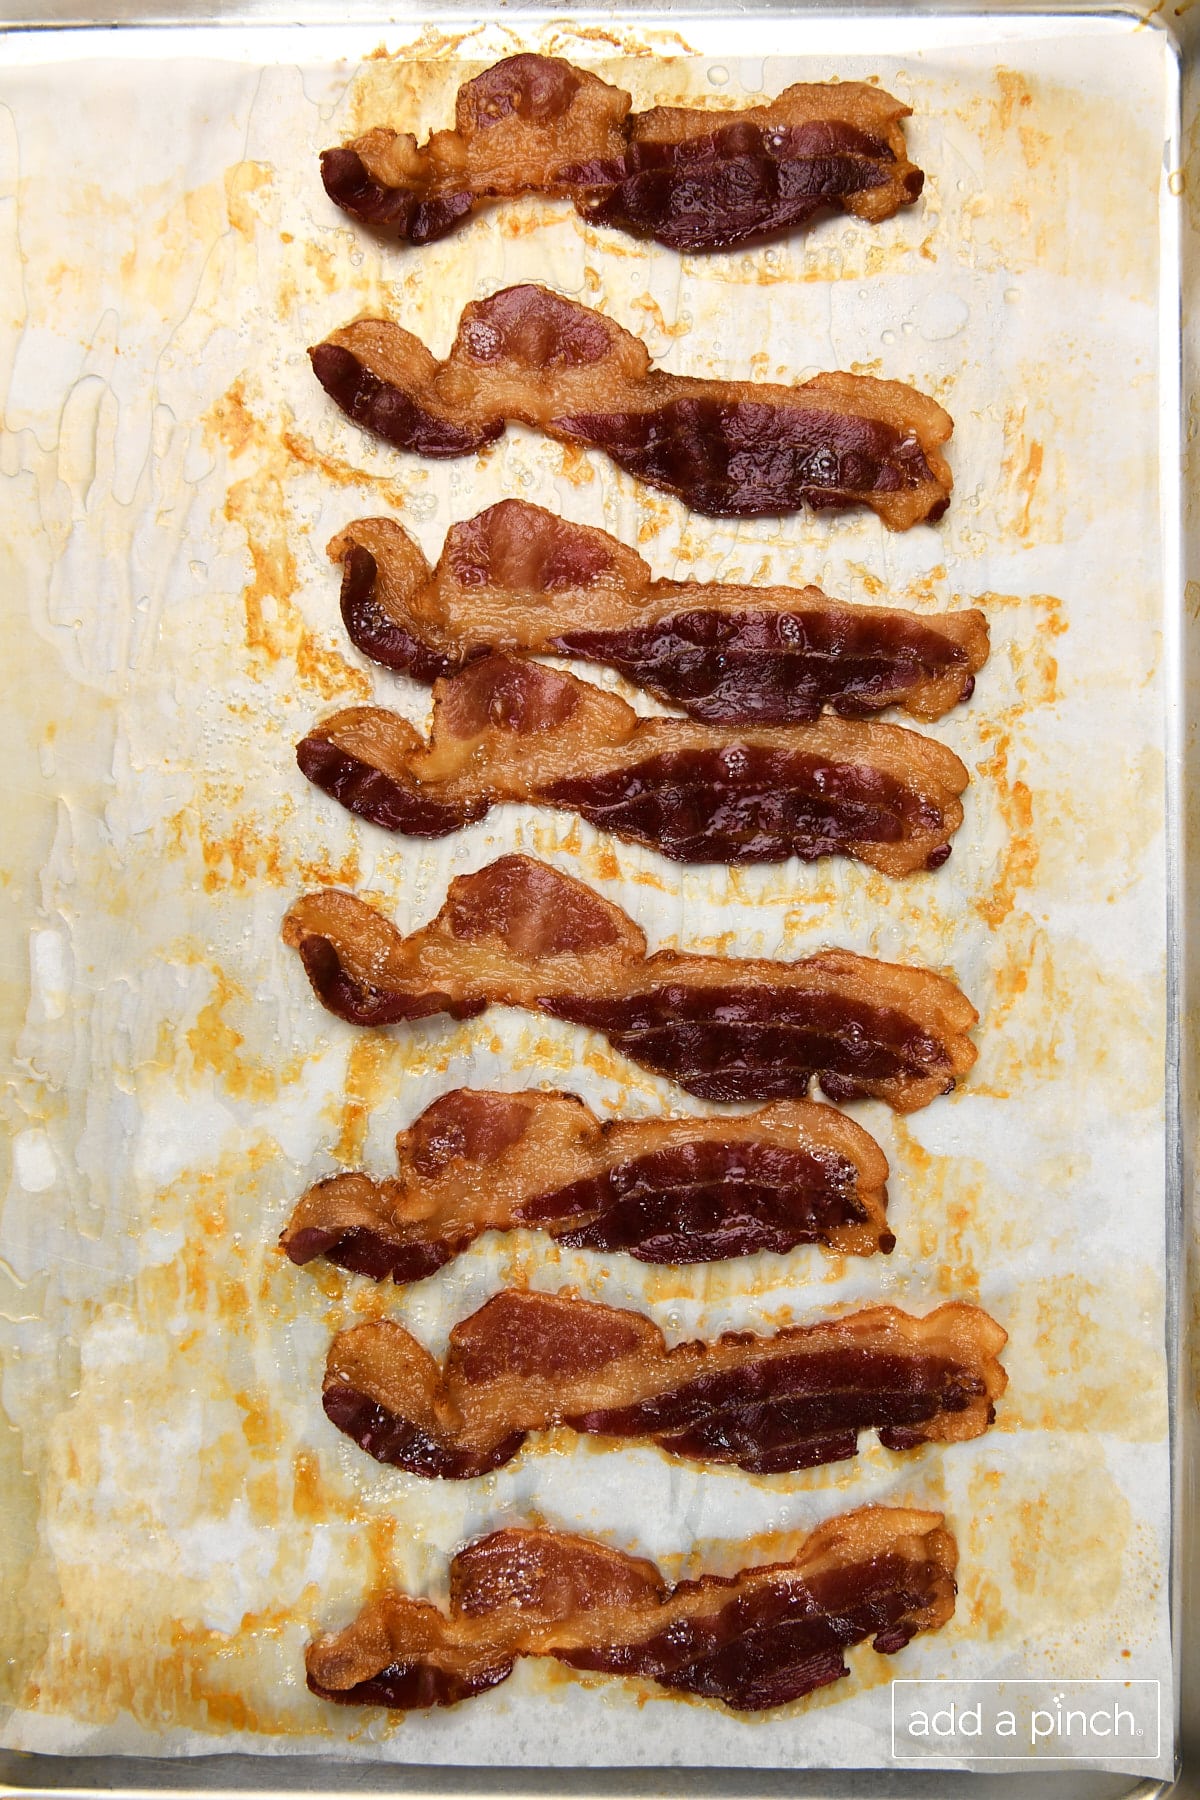 Photo of bacon cooked in the oven on a parchment lined baking sheet.